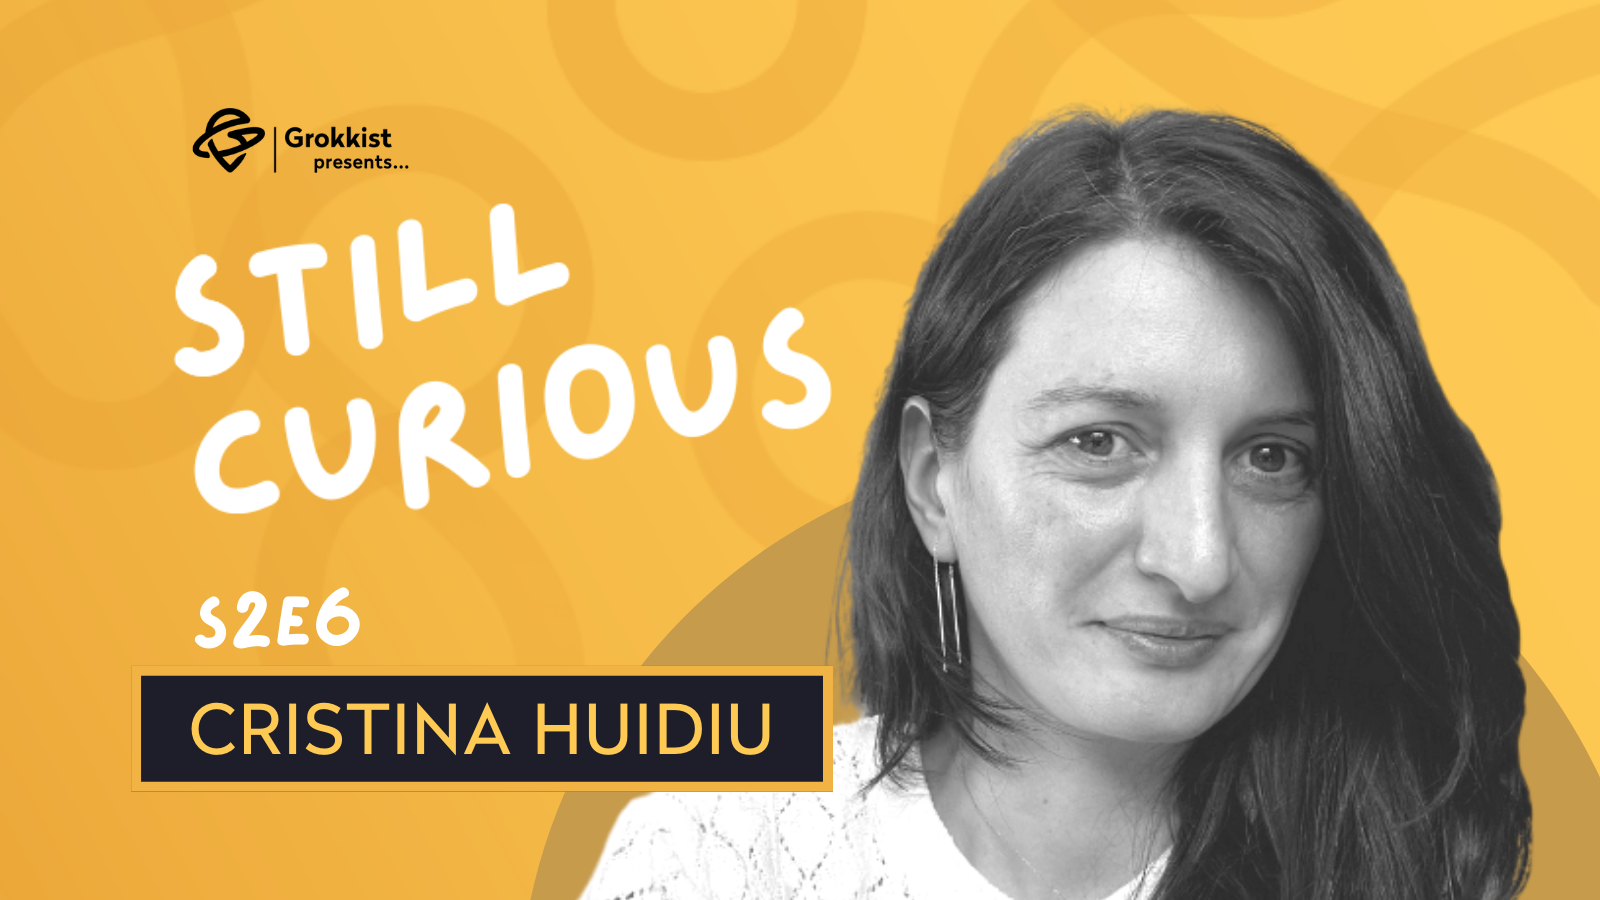 From hating math to being a data analyst - Cristina Huidiu  | S2E6